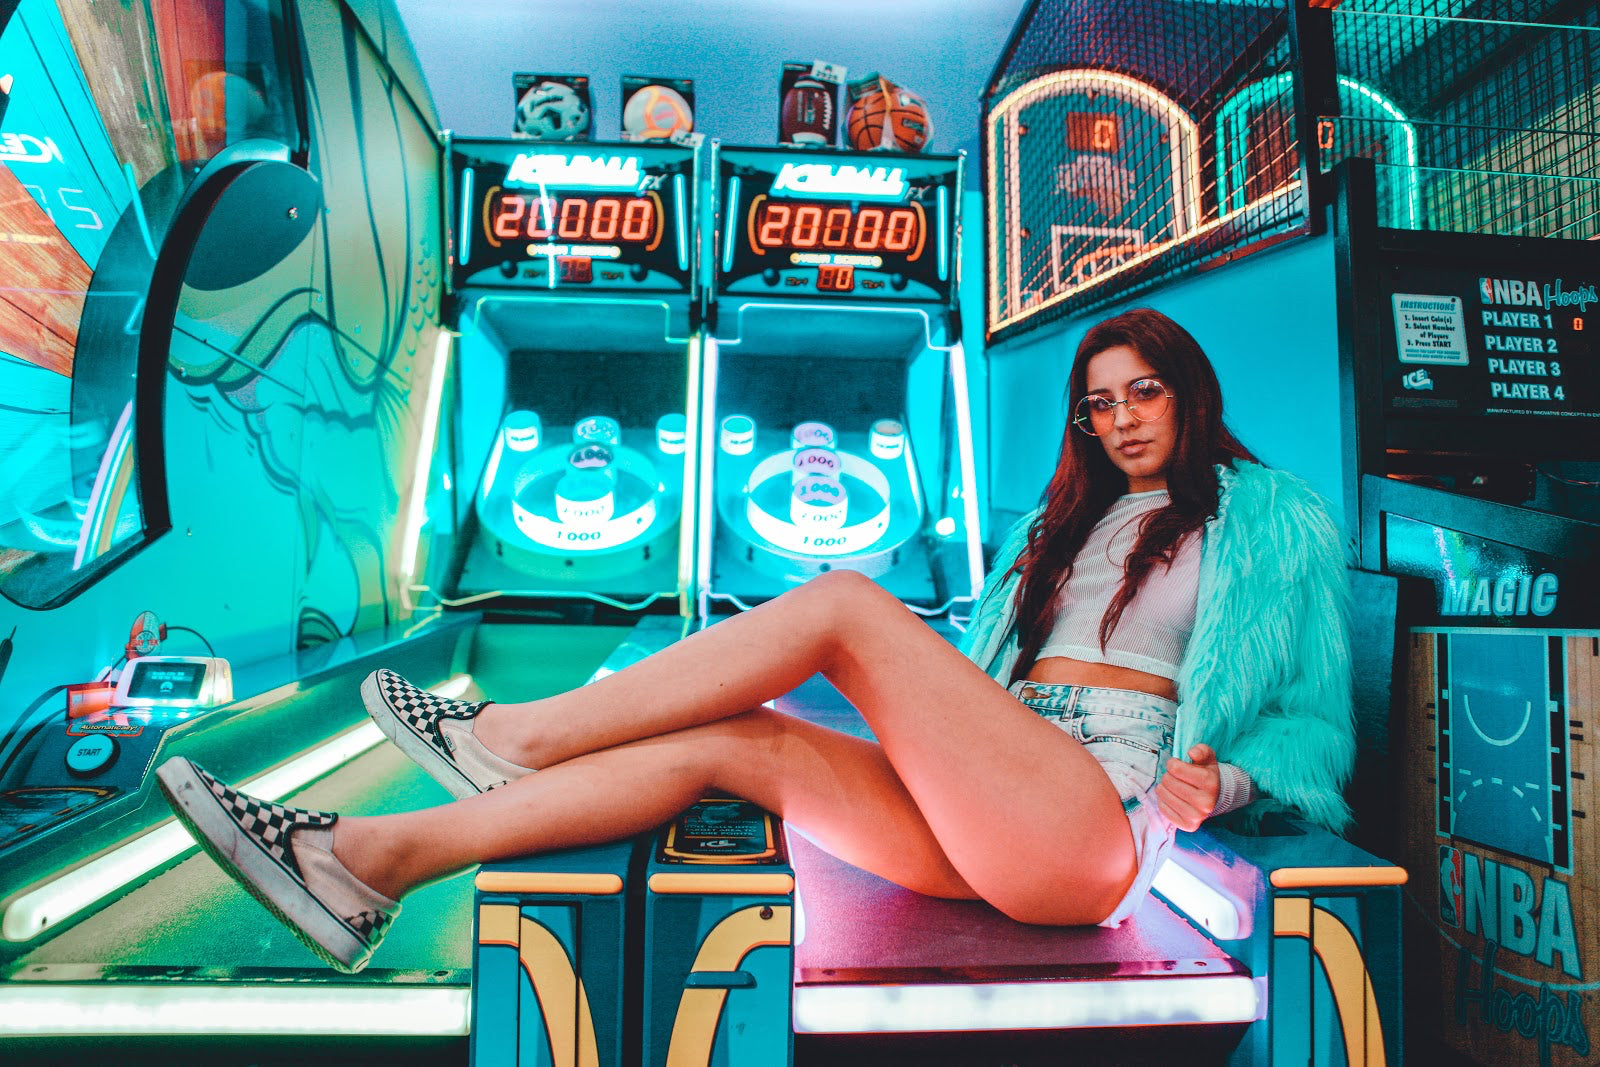 girl wearing shorts and faux fur sitting on iceball arcade game